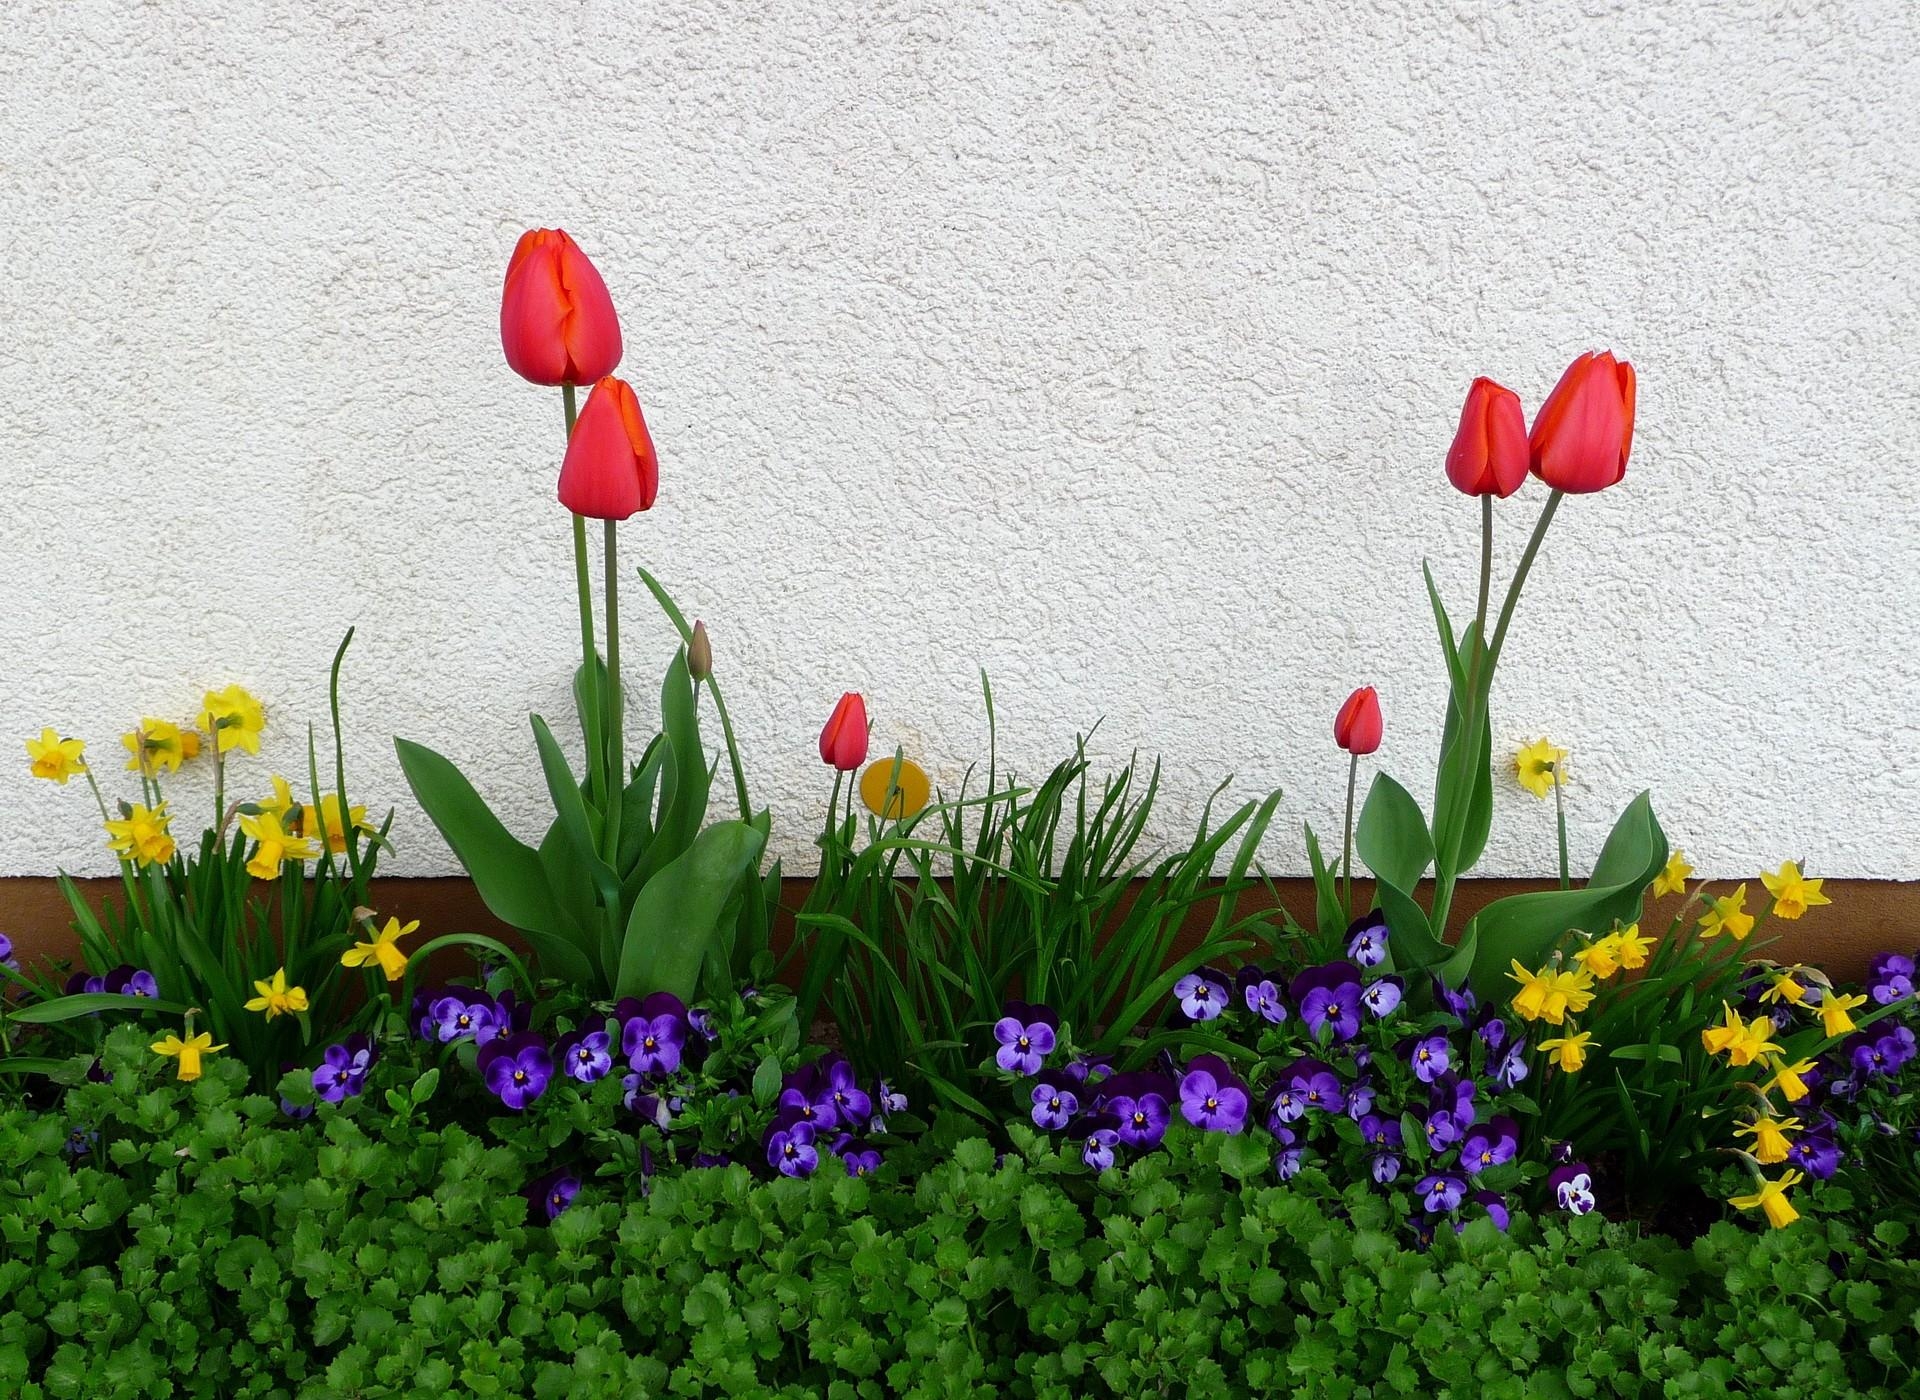 narcissussi, flowers, pansies, tulips, greens, flower bed, flowerbed, wall, spring